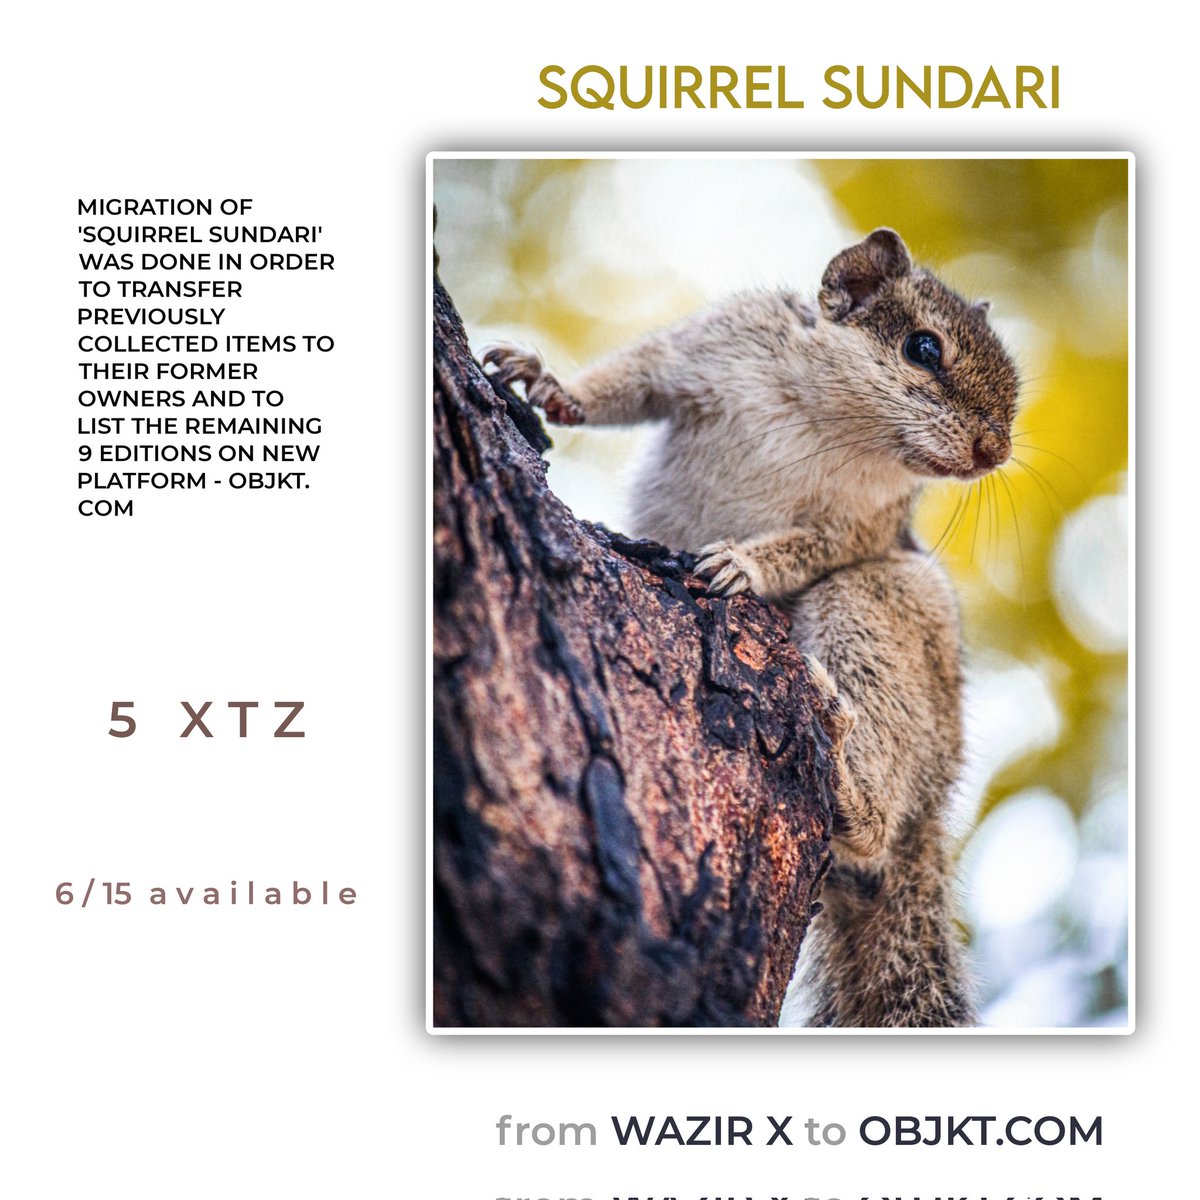 'Squirrel Sundari' from #wazirxnft to #xtz

Former owners kindly share your tez wallet address in comments for transfer

@TheFadinSoul @mpix47 @EnvisionArtnft @dsk_arts @Shabarigirisan4 @TheNFTwazir @AniGraphicsD and (unknown)